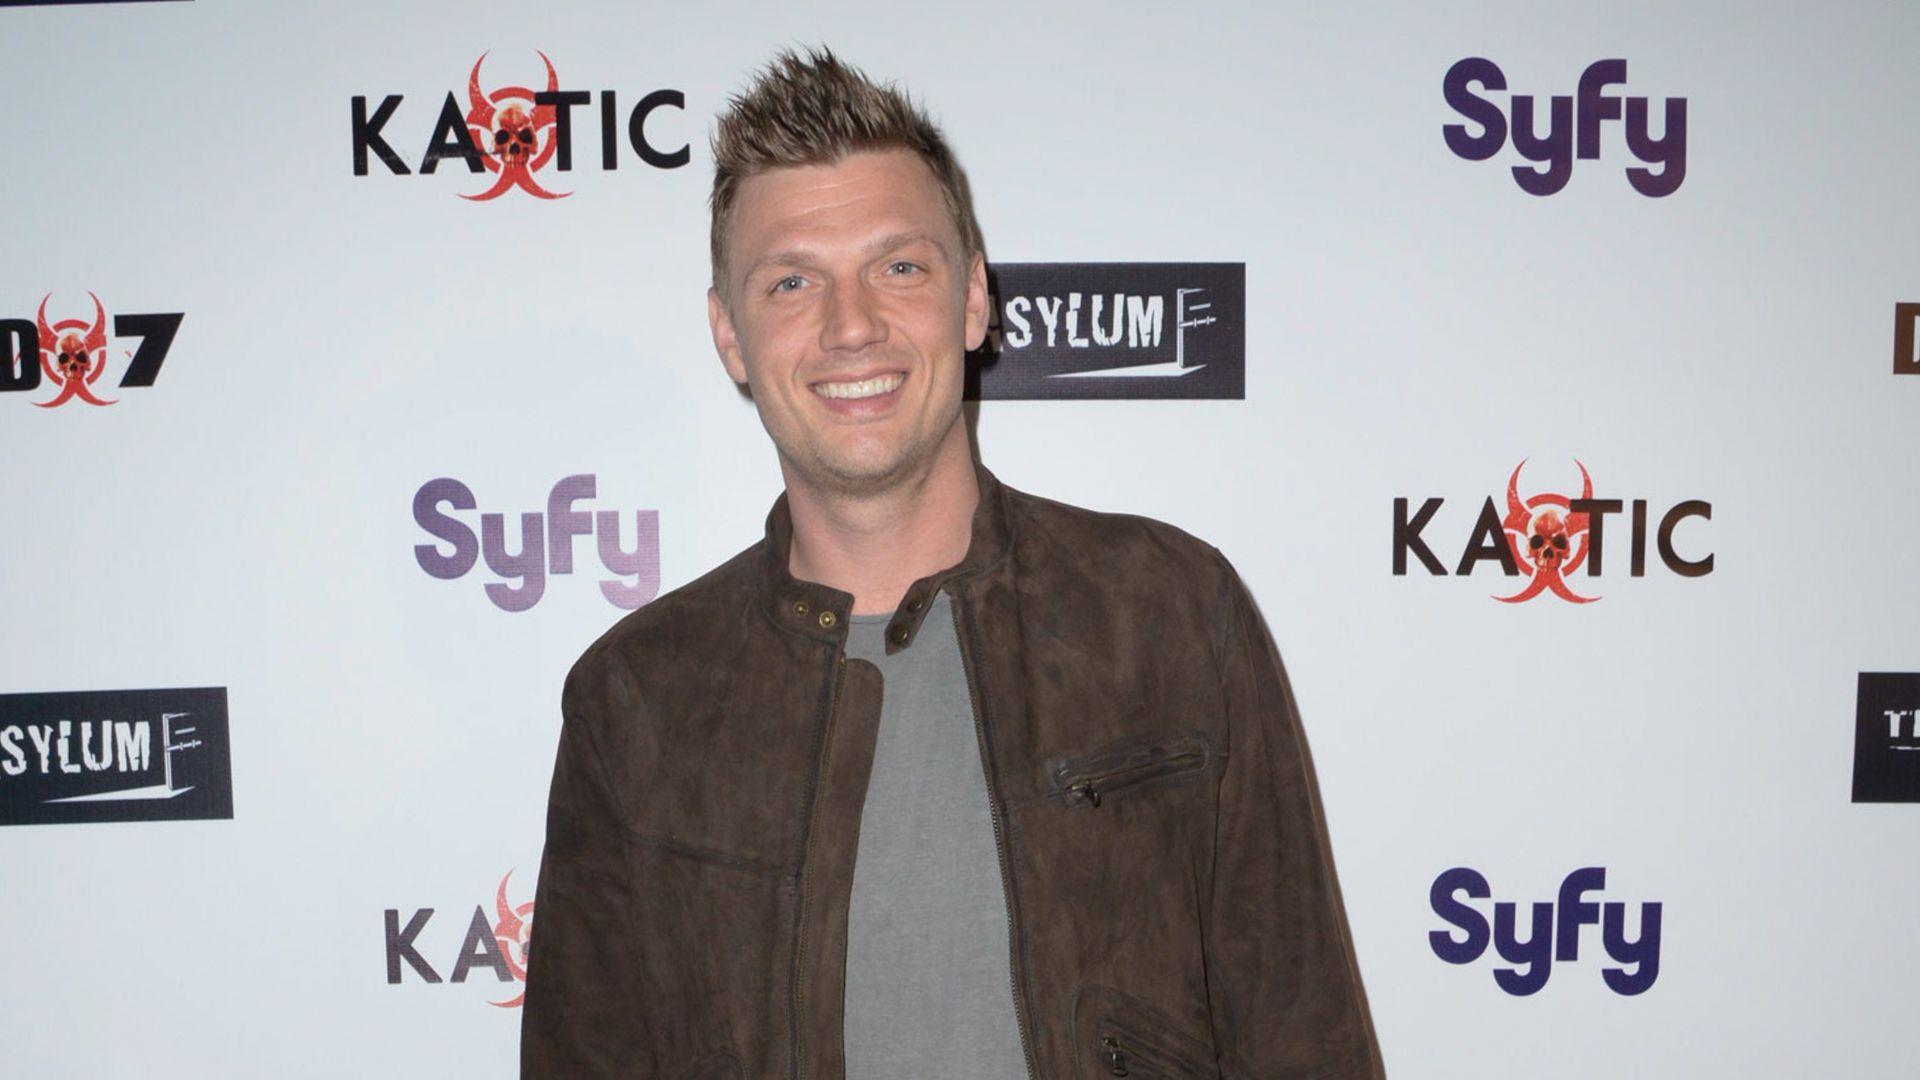 Nick Carter Wallpaper Image Photo Picture Background